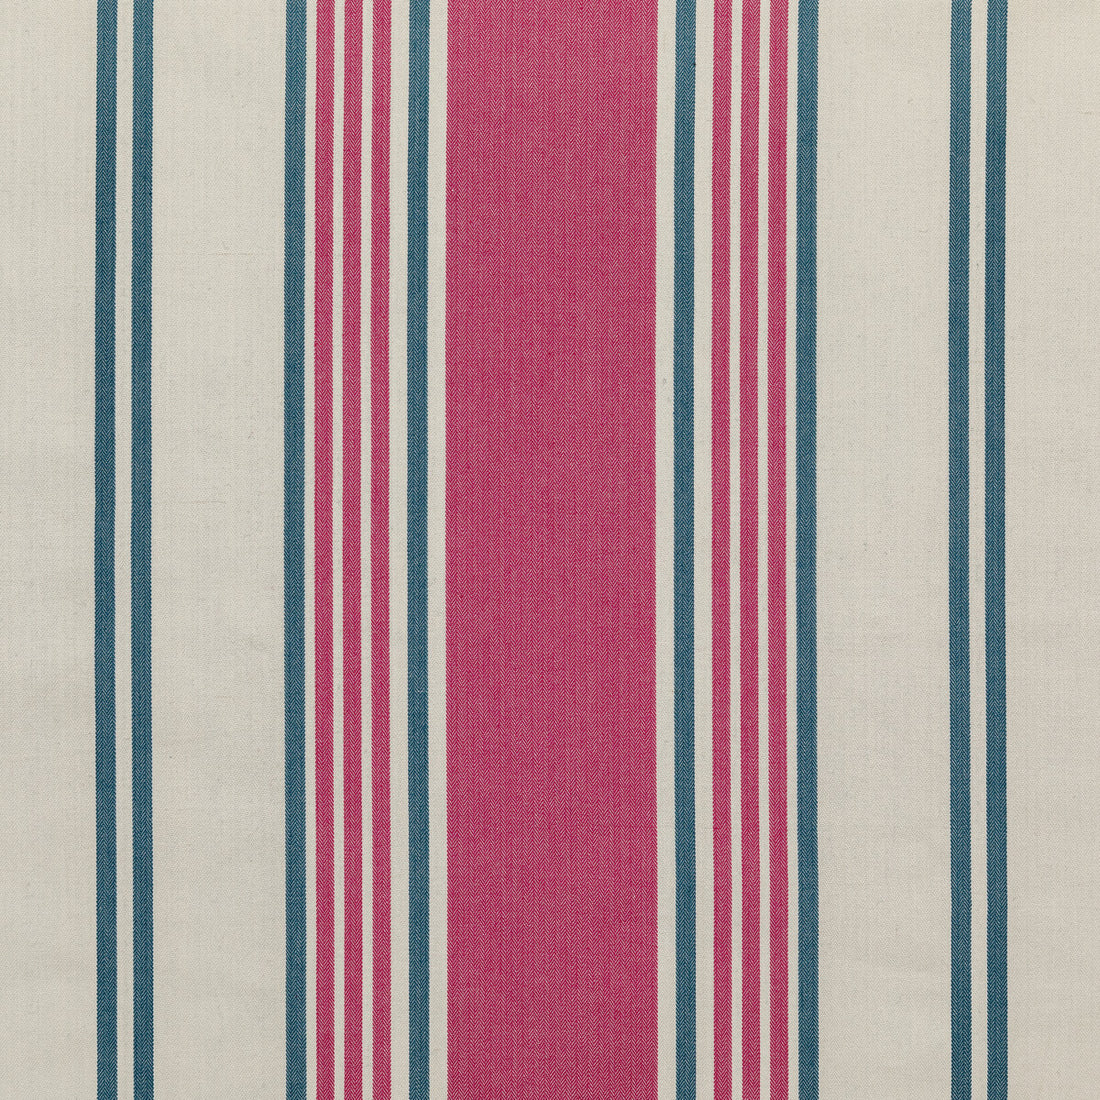 Derby Stripe fabric in cerise/blue color - pattern BFC-3686.517.0 - by Lee Jofa in the Blithfield collection